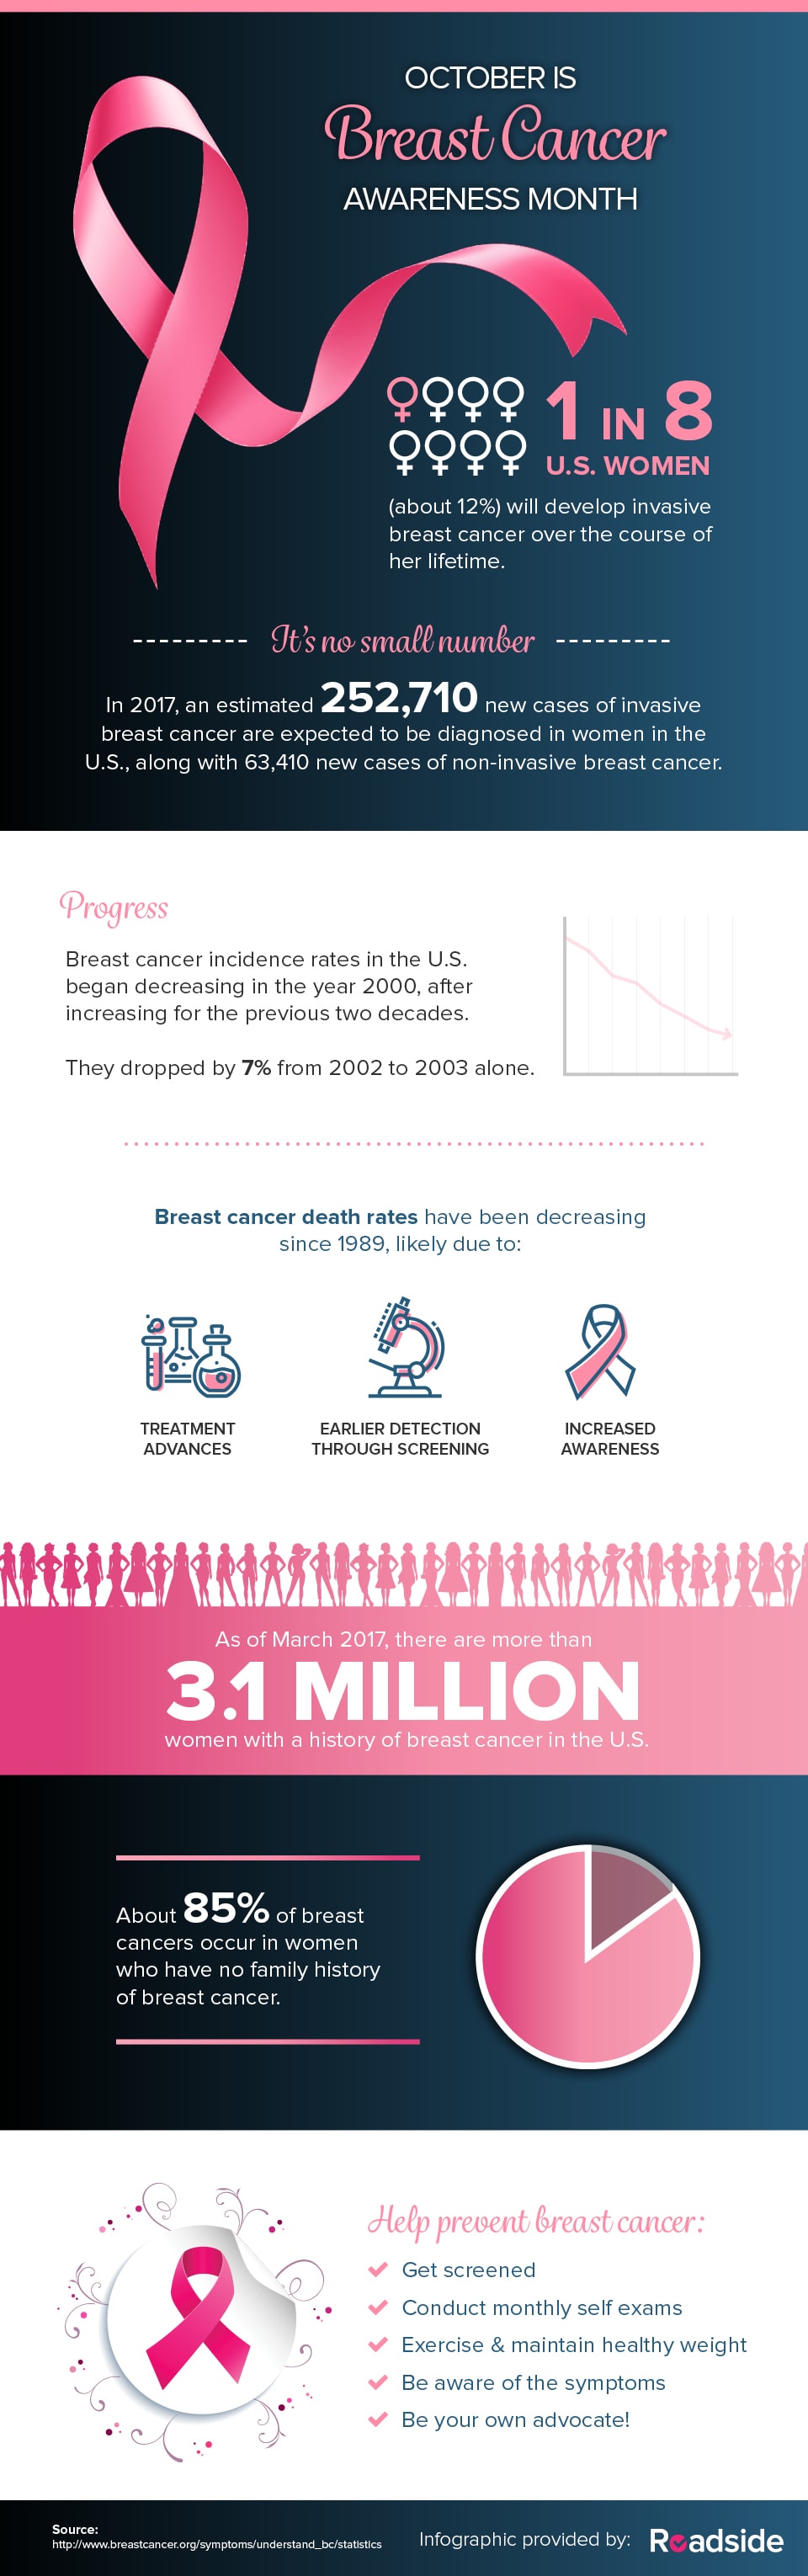 Infographic featuring 2017 breast cancer statistics